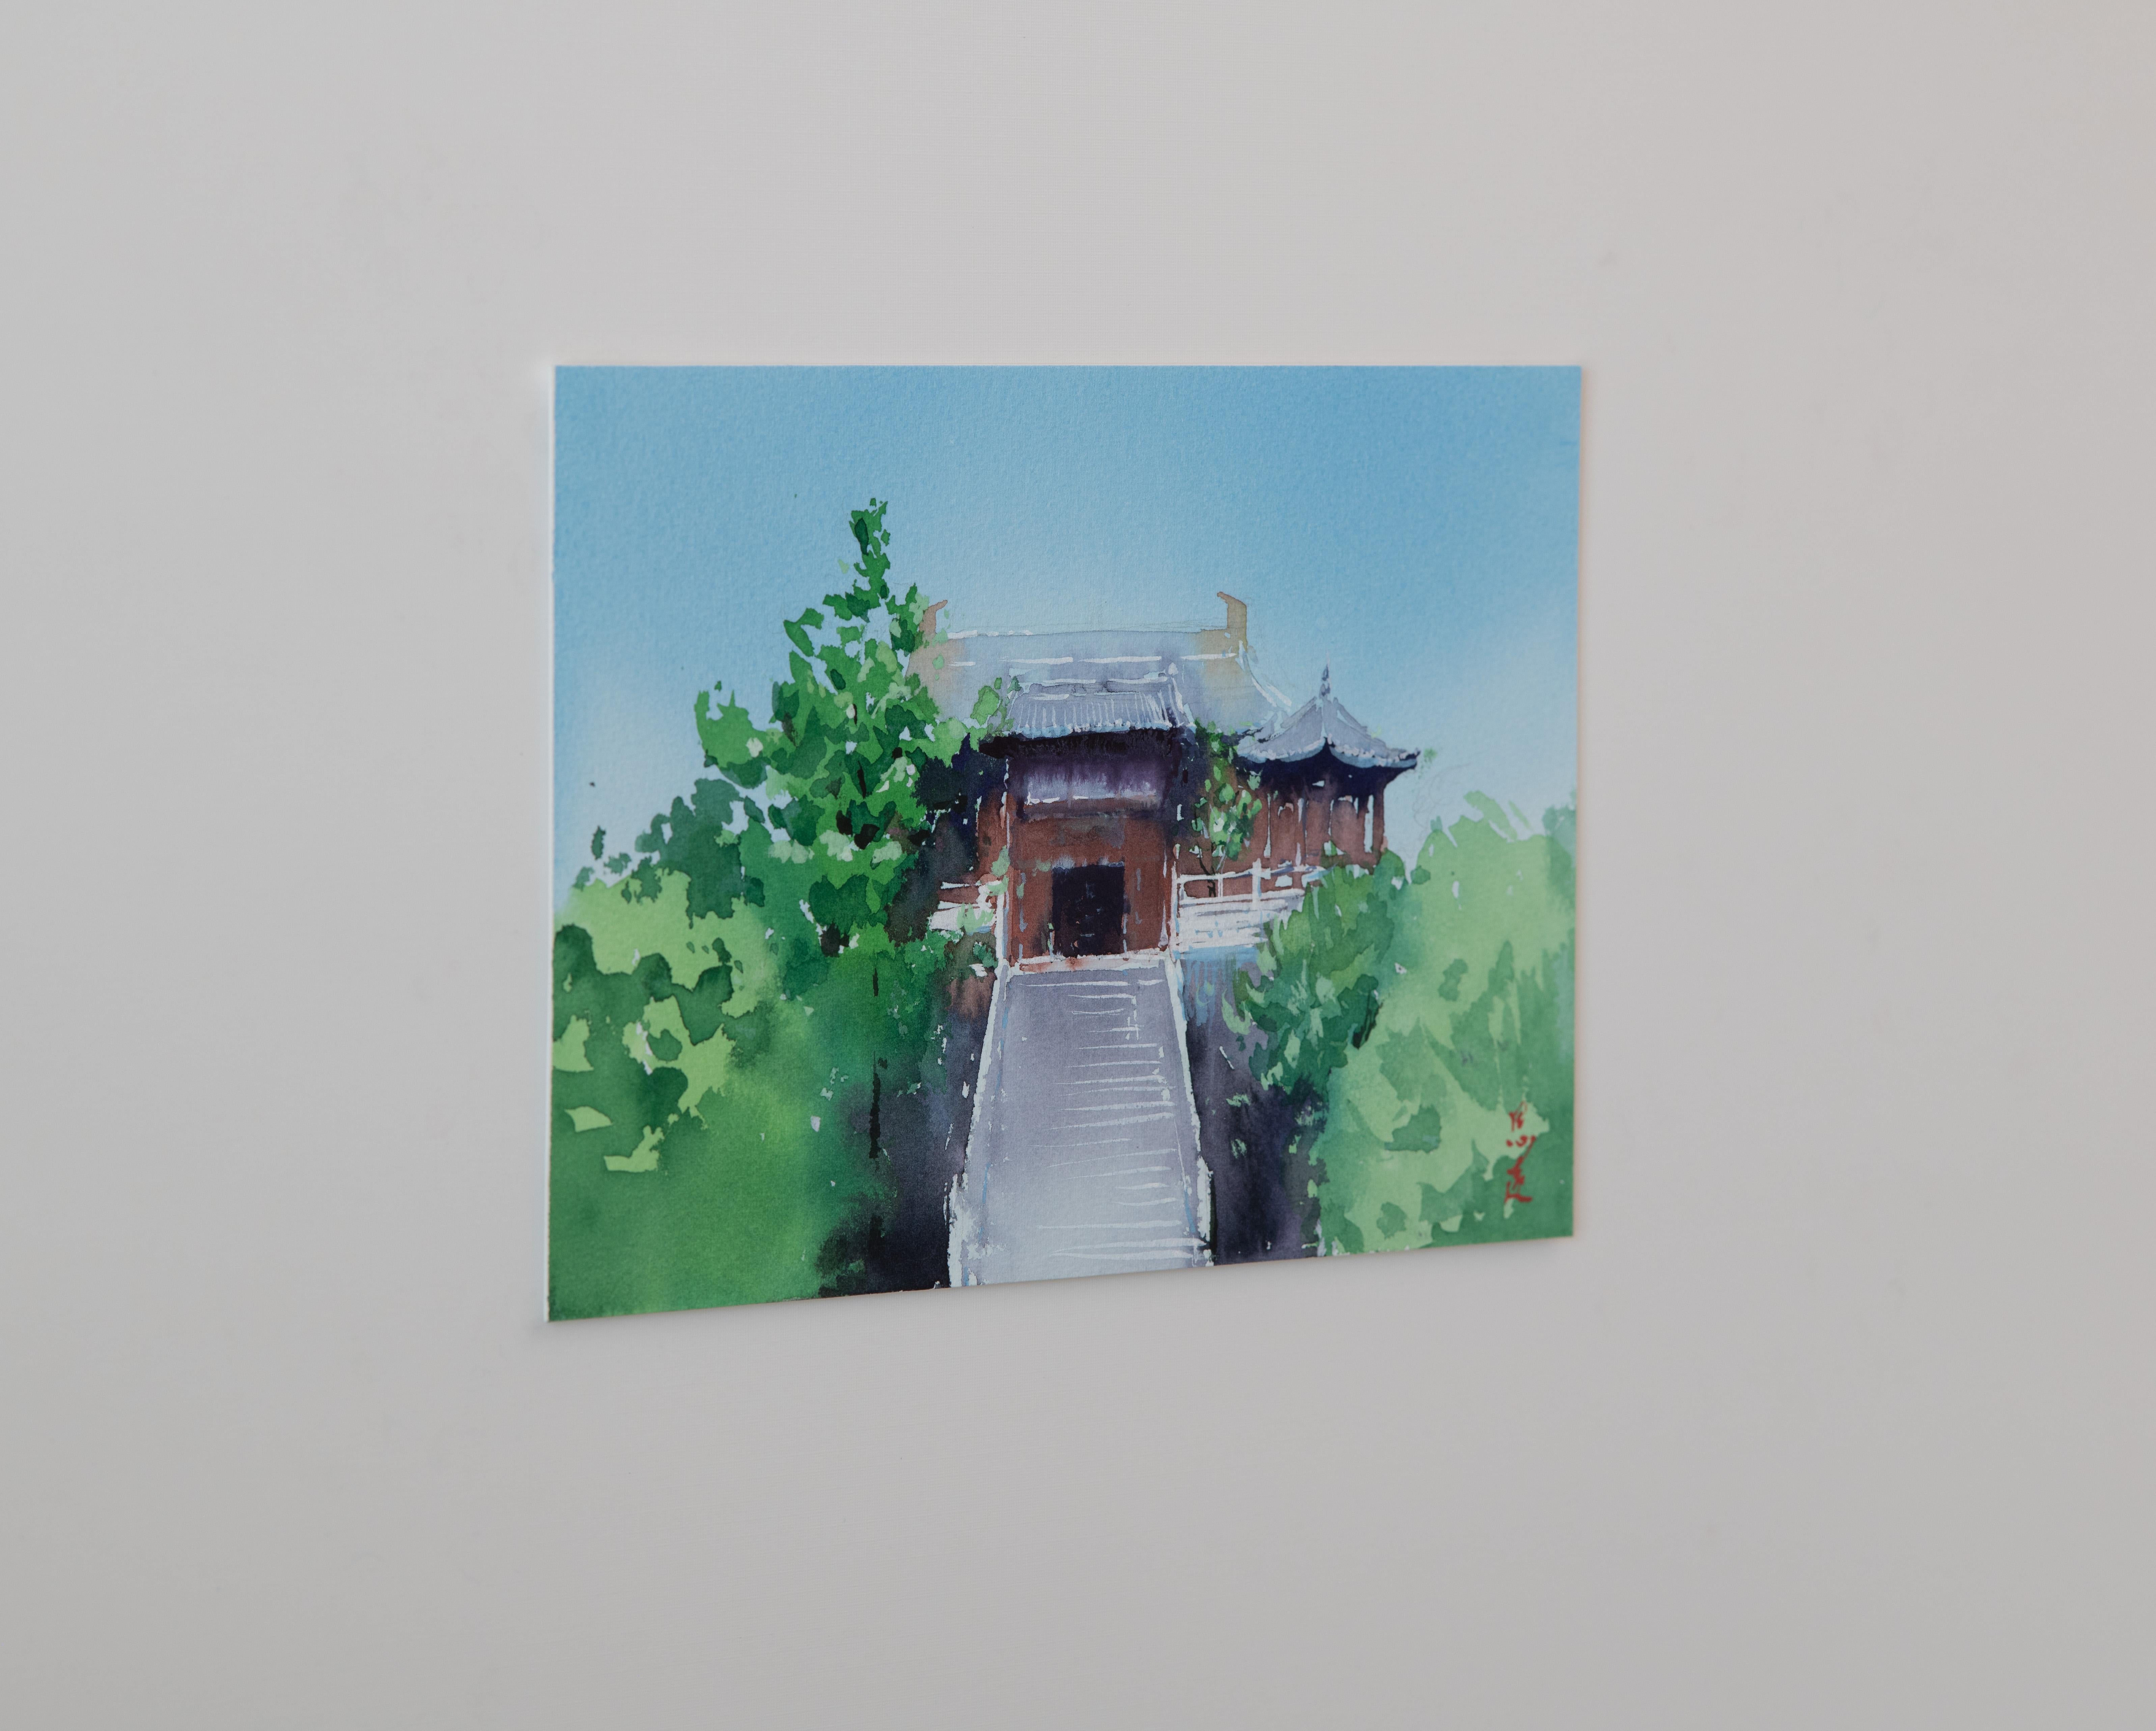 Watercolor Impressions of Chinese Architecture 8, Original Painting - Art by Siyuan Ma